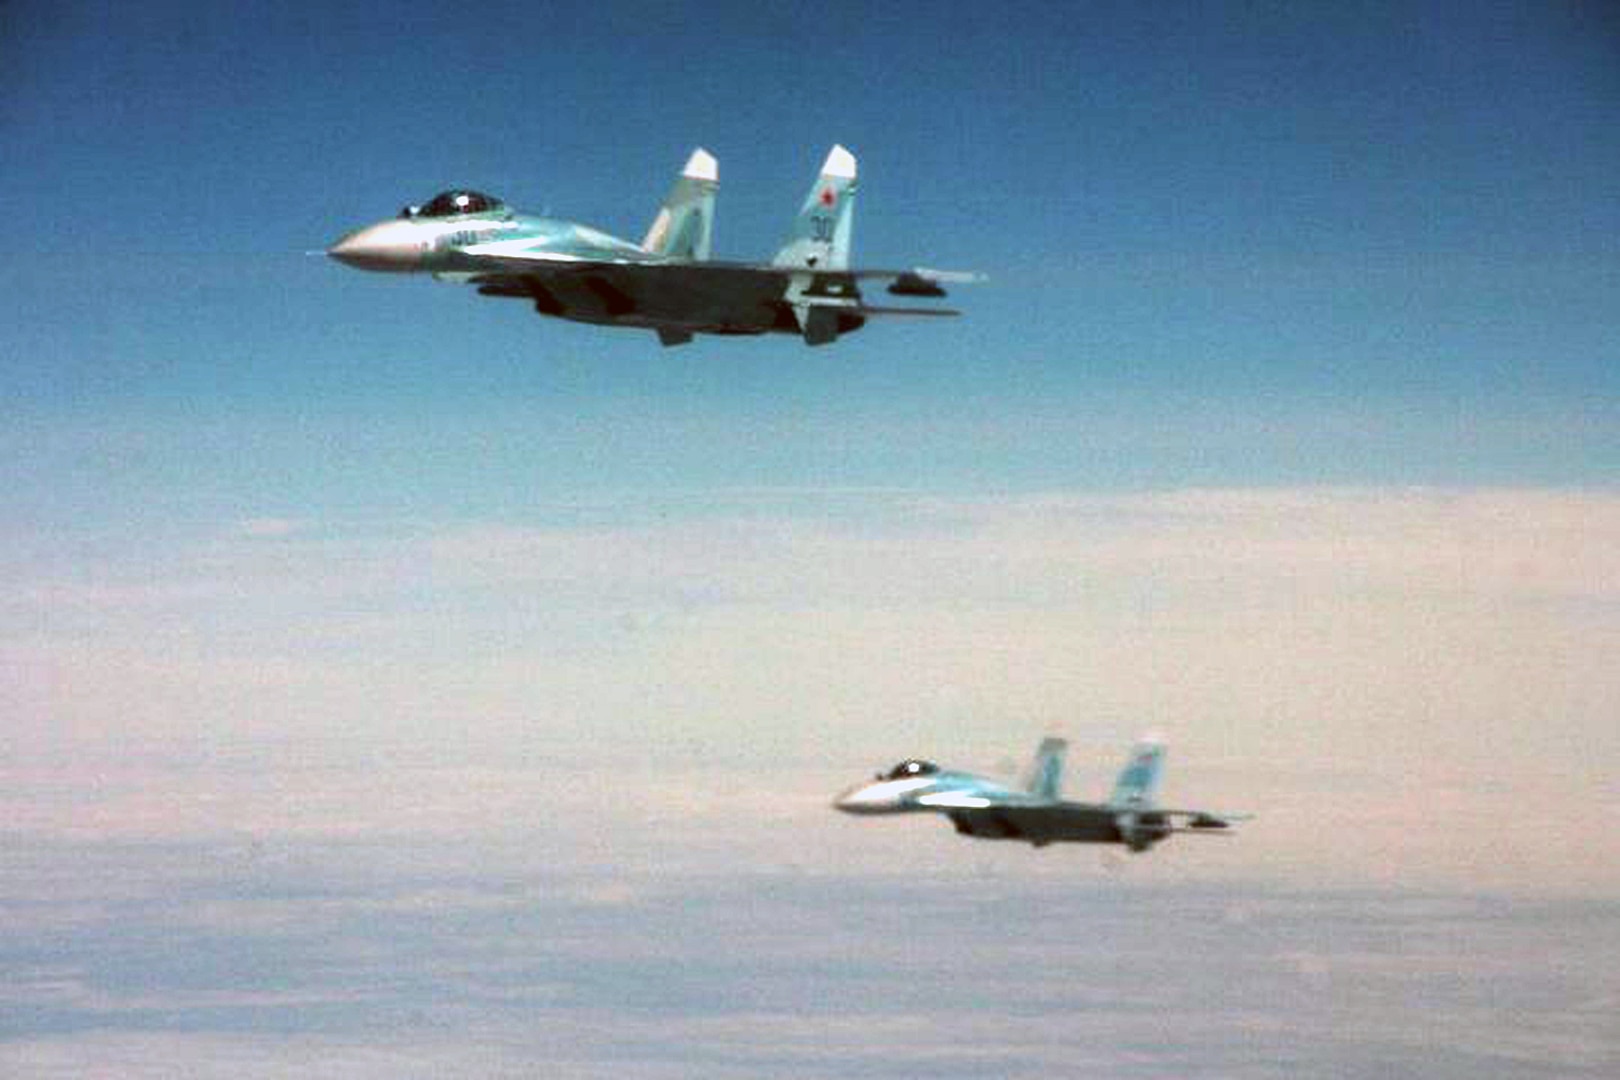 OVER THE PACIFIC OCEAN - Two Russian SU-27 fighters intercept Fencing 1220, the target of interest for Exercise VIGILANT EAGLE Aug. 8. VIGILANT EAGLE is a cooperative exercise involving the North American Aerospace Defense Command and the Russian Air Force. The exercise scenario creates a situation that requires both the Russian Air Force and NORAD to launch or divert fighter aircraft to investigate and follow a "hijacked" airliner. The exercise focuses on shadowing and the cooperative hand-off of the monitored aircraft between fighters of the participating nations. 

(U.S. Army photo by Maj. Mike Humphreys) 

